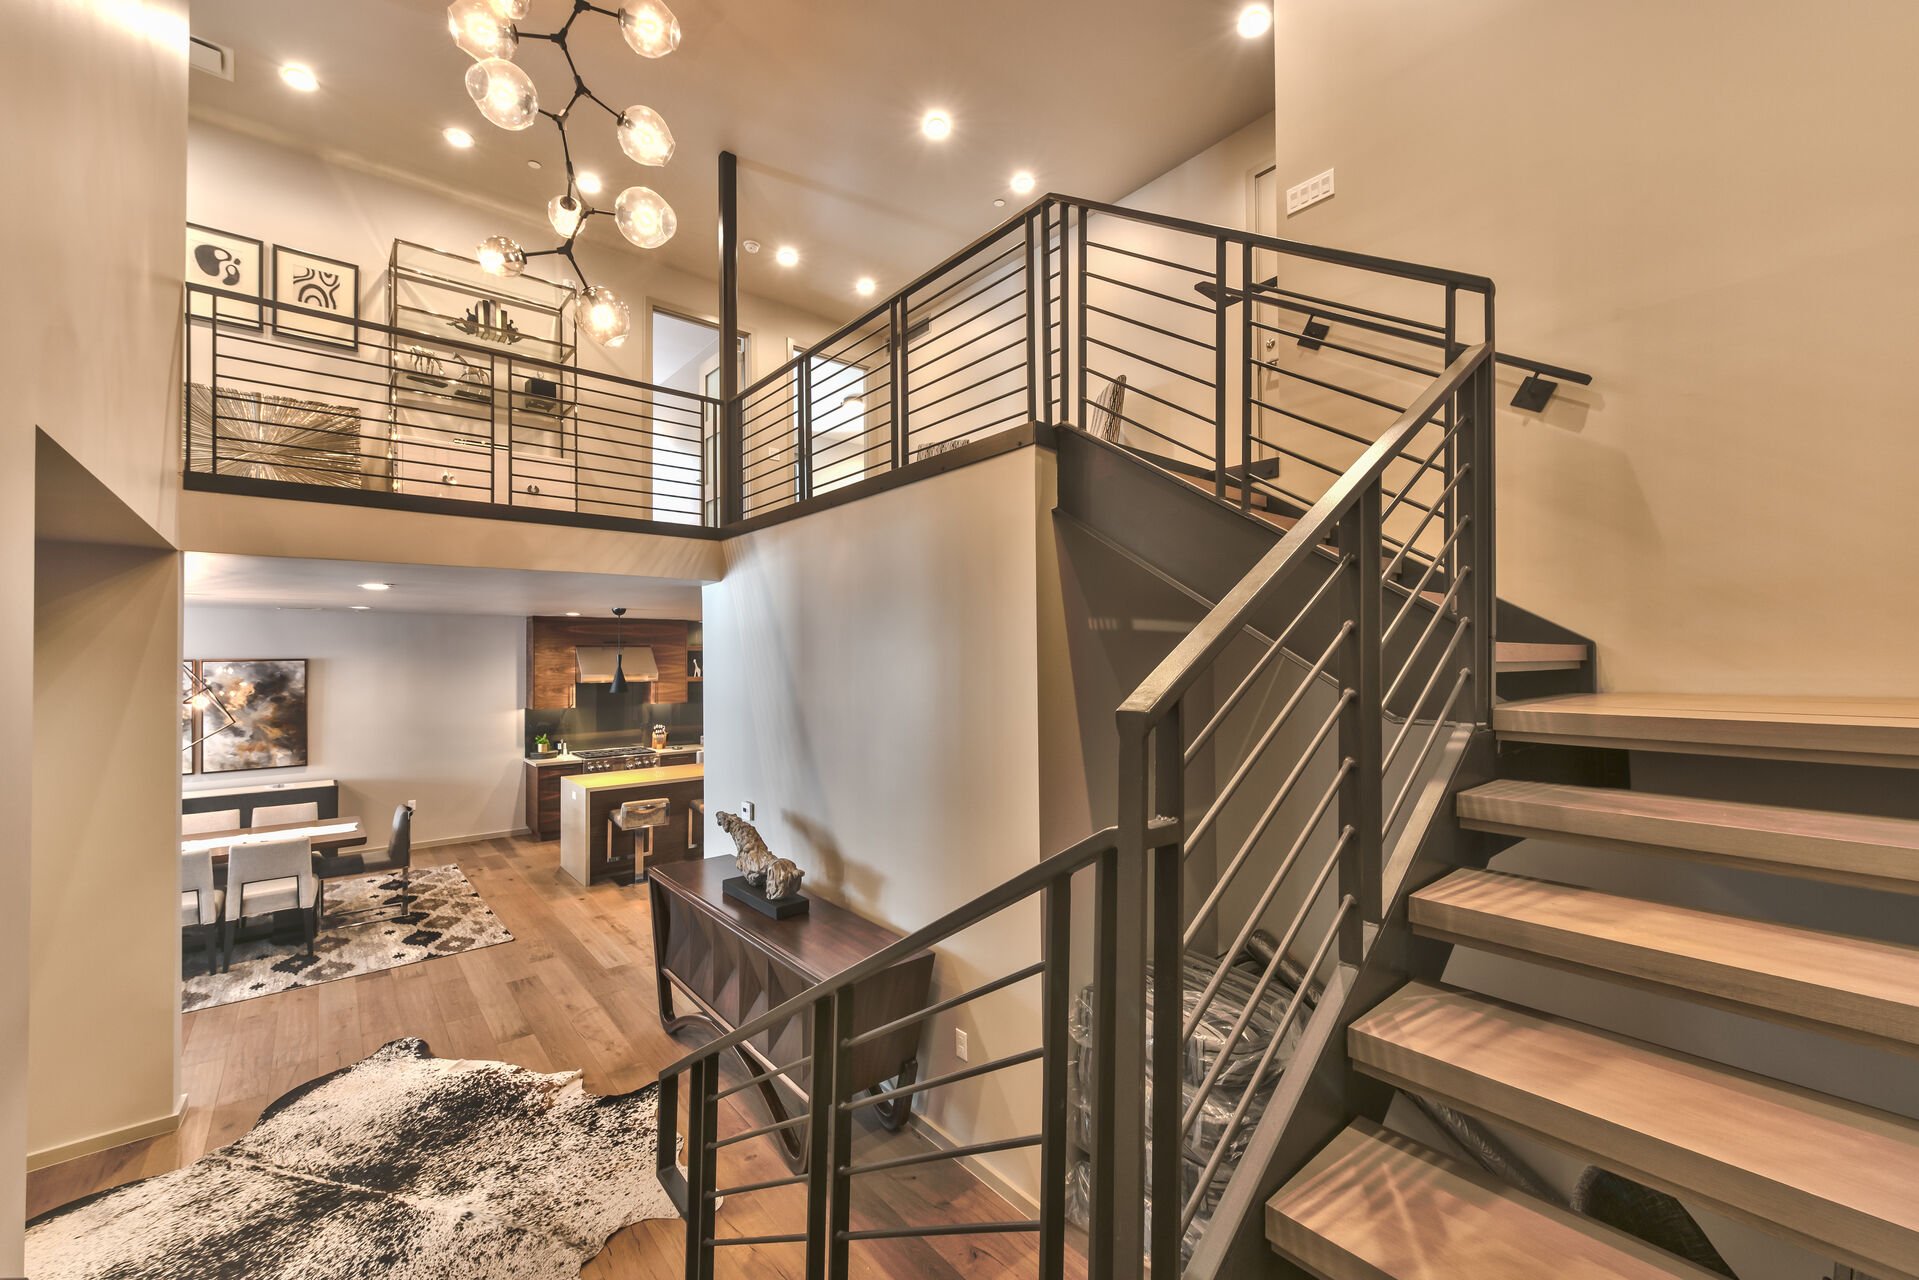 Condo Entry and Stairway to 2nd Level